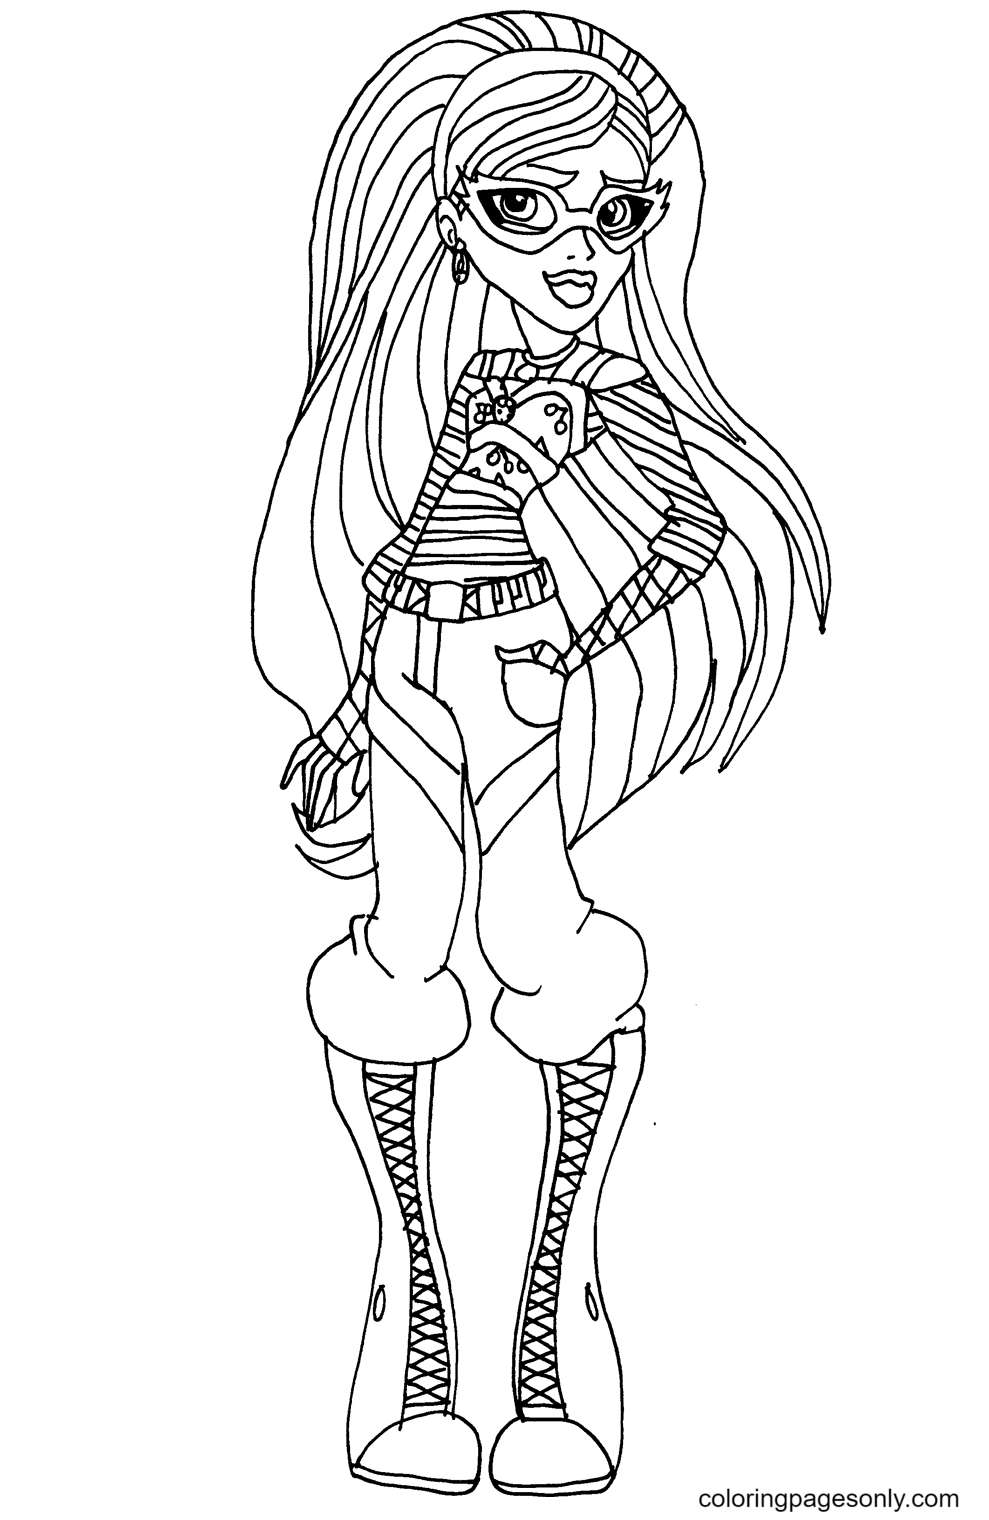 Monster High Ghoulia Yelps Coloring Pages